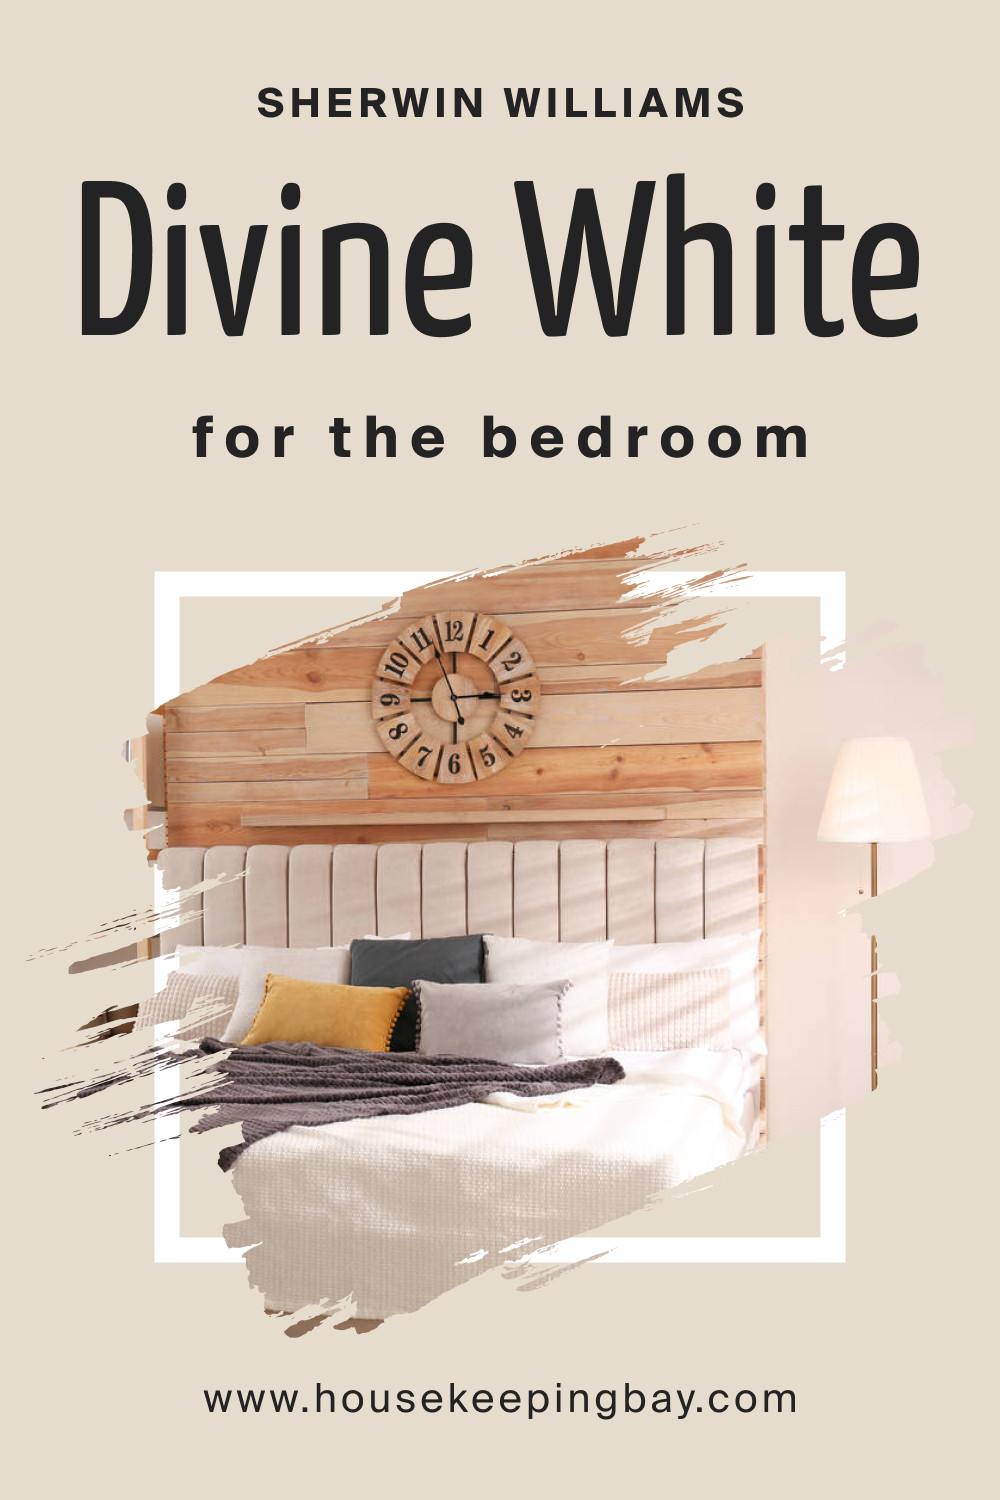 Sherwin Williams. SW Divine White For the bedroom